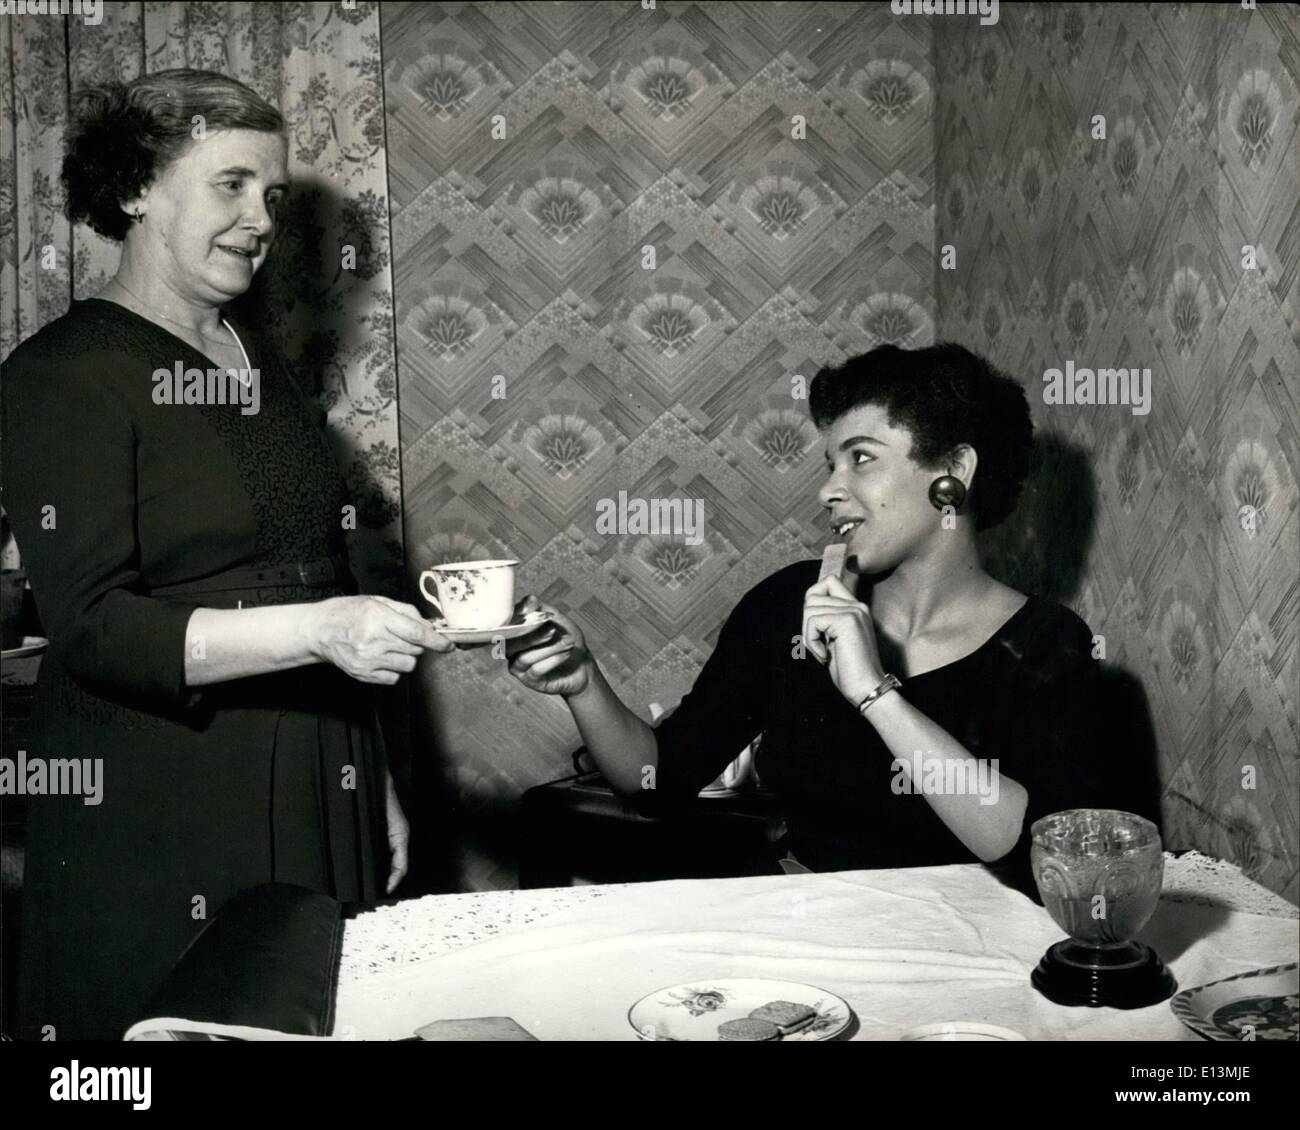 Mar. 02, 2012 - SHIRLEY BASSEY ENJOYS A HOMELY CUP OF TEA. Coloured Blue singer, Shirley Bassey, enjoys being at home and having tea with her mother. THE GIRL FROM CARDIFF'S ''TIGER BAY'' FOR LAS VEGAS AND HOLLYWOOD SHIRLEY BASSEY ON THE SKYWAY TO SUCCESS IN THE STATES. Britain's recently risen coloured 18-year-old blues singer from the slum dock area of Cardiff (Wales) is soon to star in Las Vegas. She leaves foe America in mid-january and after starring in Las Vegas will go on for film tests in Hollywood Stock Photo